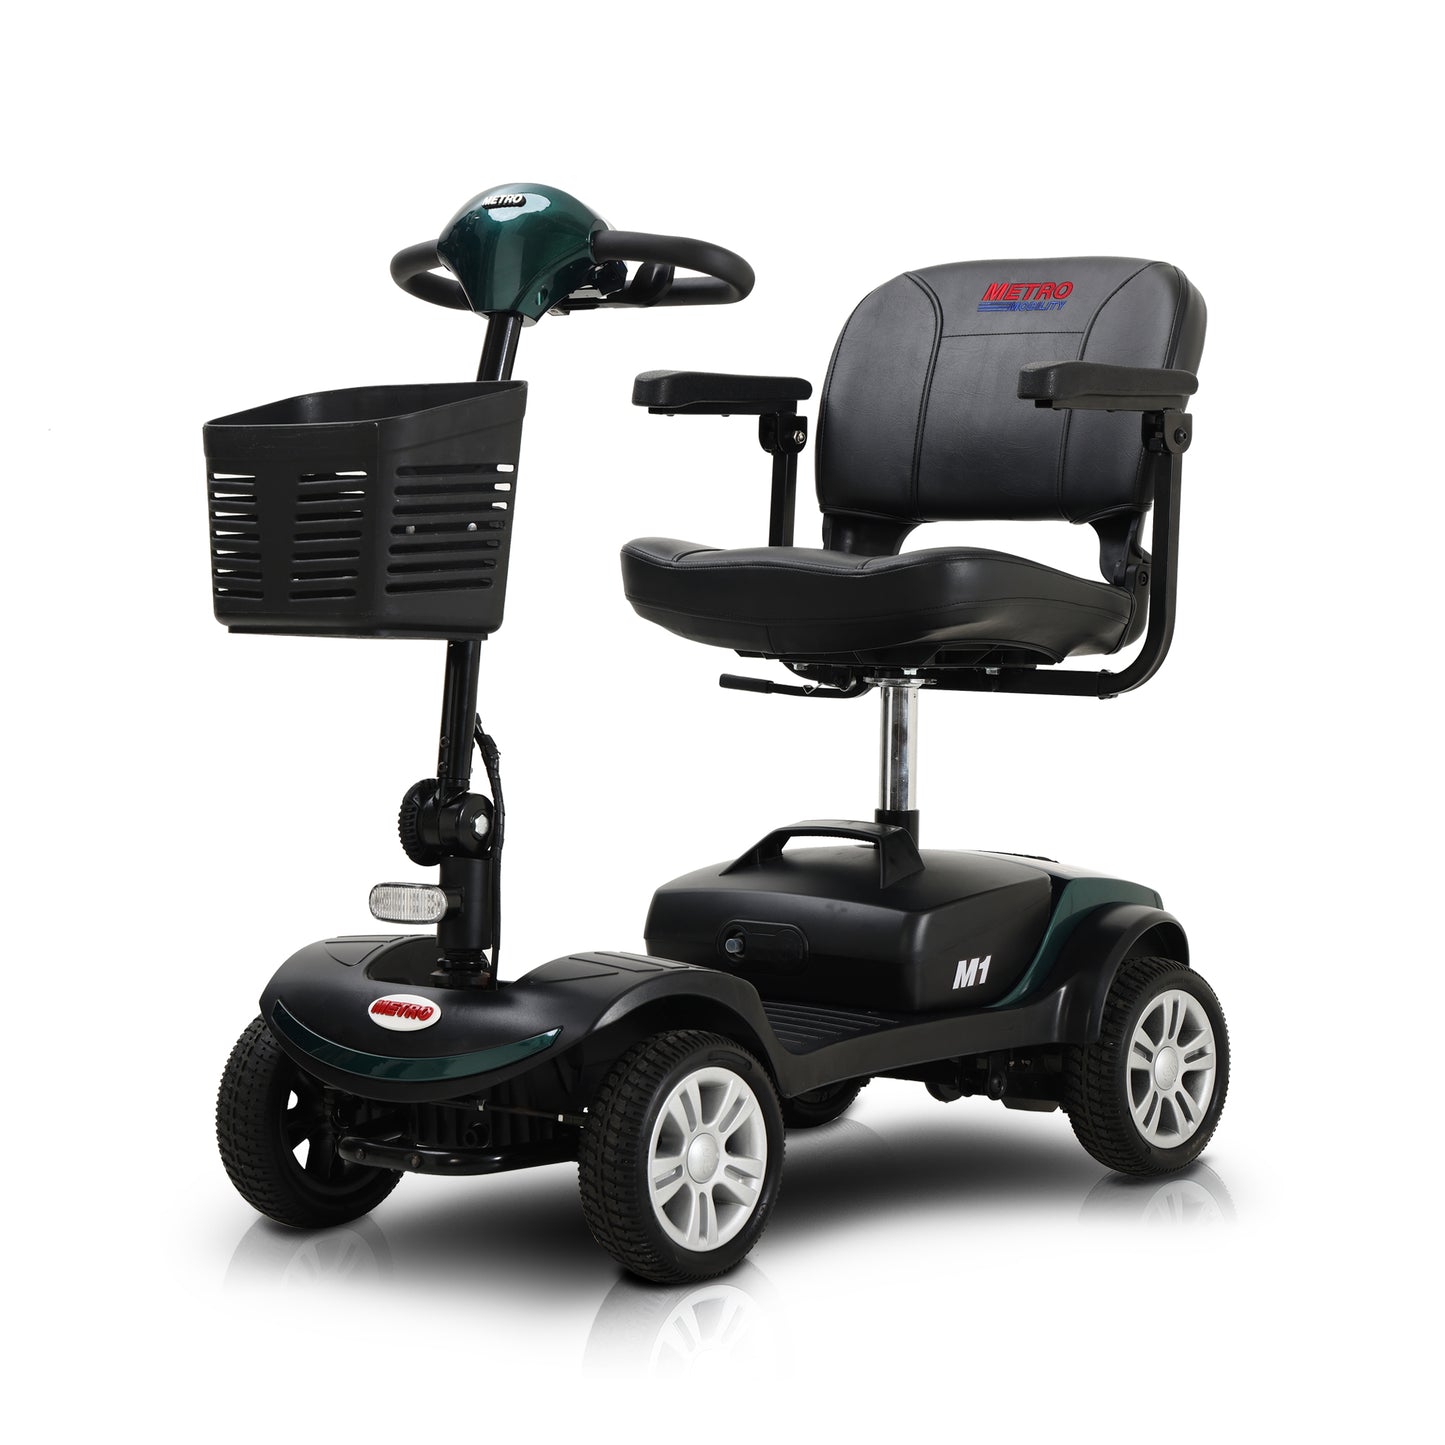 Emerald Metromobility M1 Portal 4-Wheel Mobility Scooter | Compact Travel Power Mobility Scooter